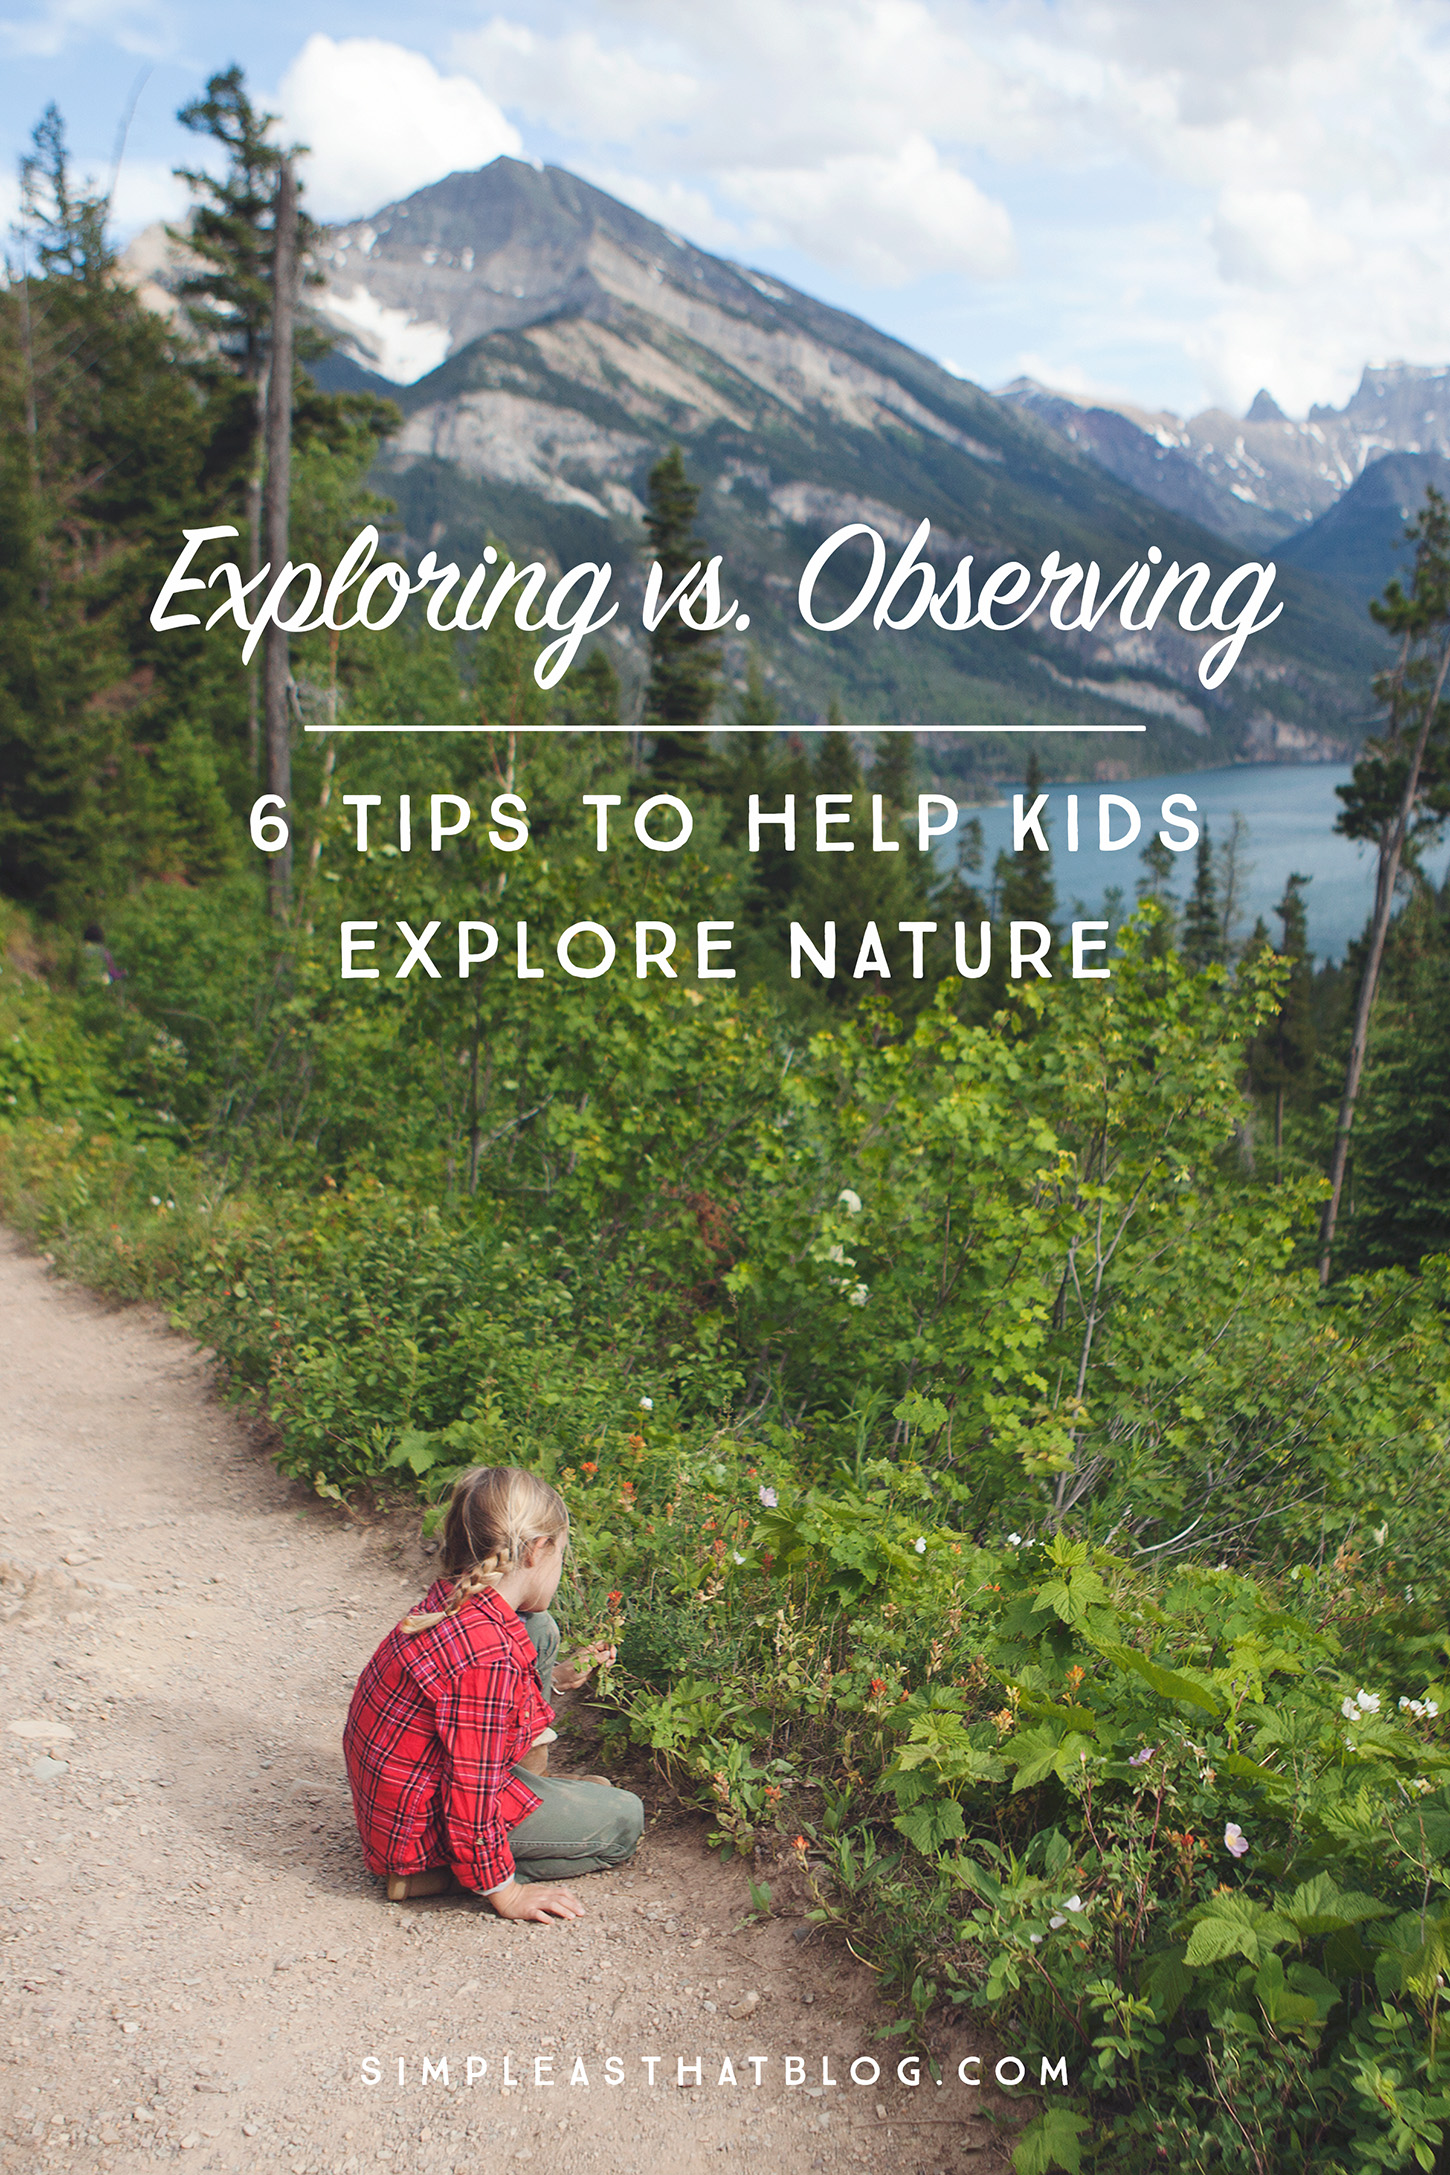 For families who would like to leap from observing to exploring, here are 6 tips to help kids EXPLORE nature with all of their senses.